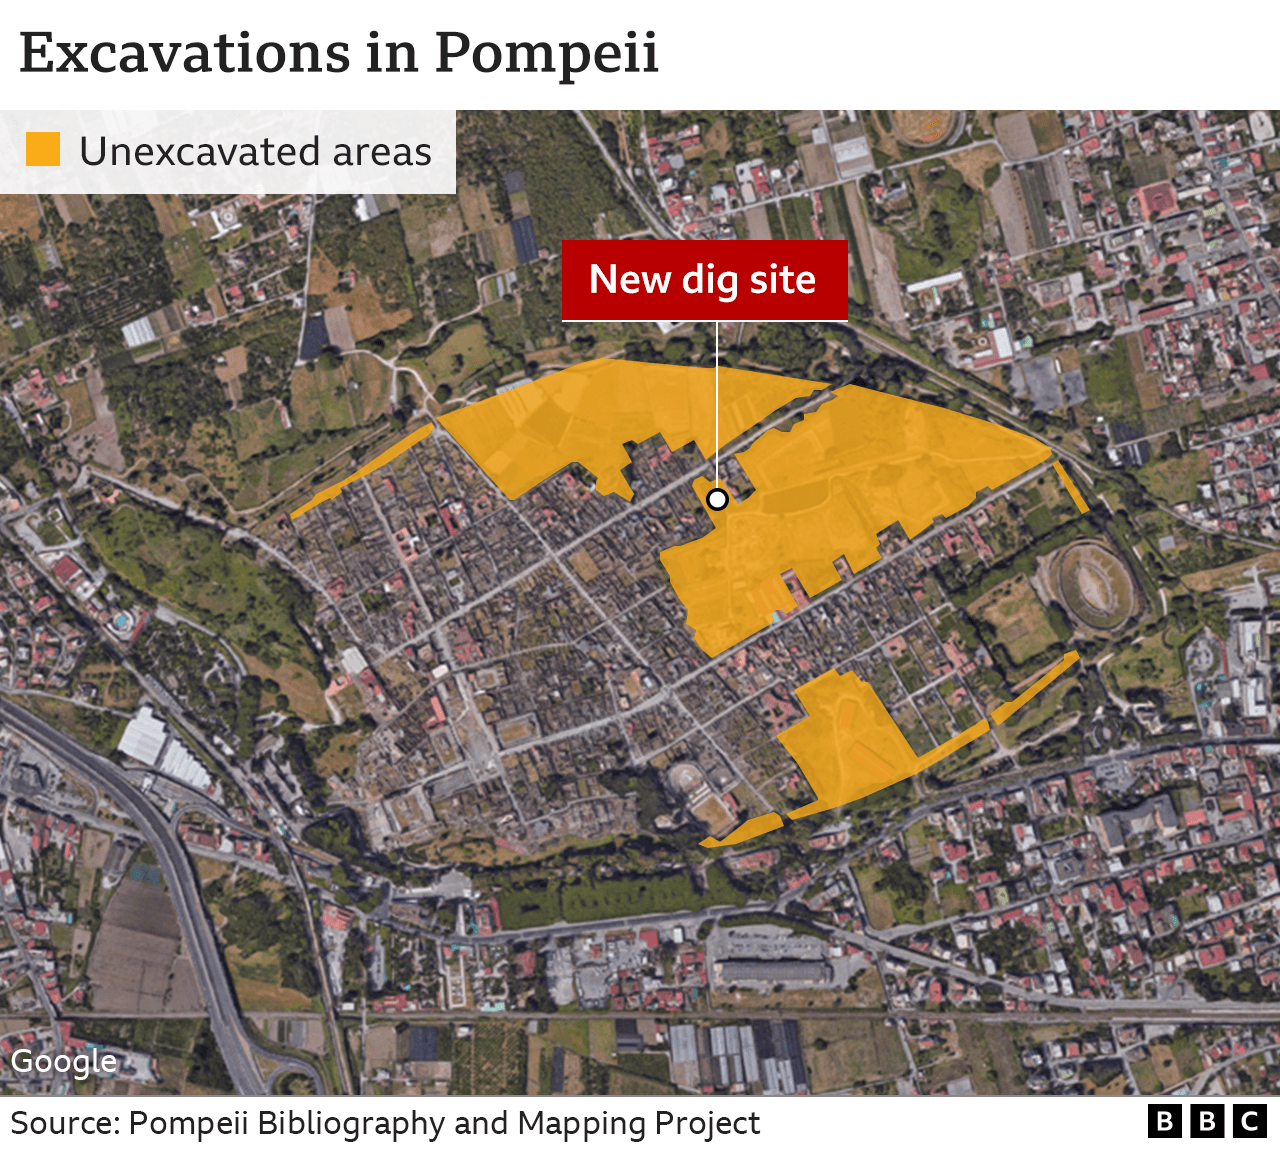 Map showing excavations in Pompeii